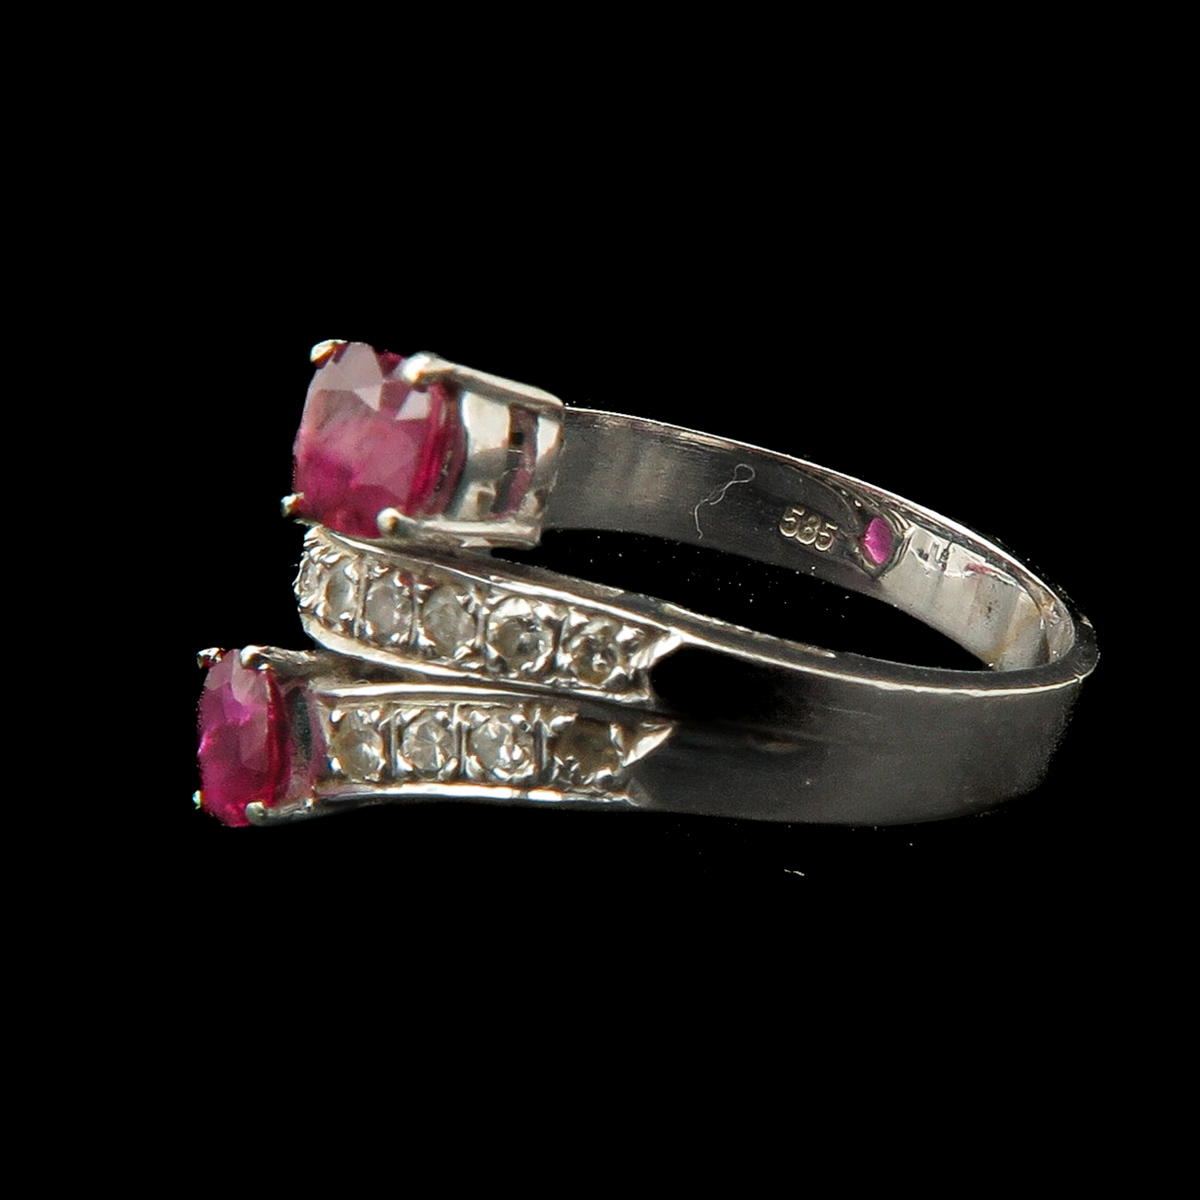 A Diamond and Ruby Ring and Bracelet - Image 6 of 7